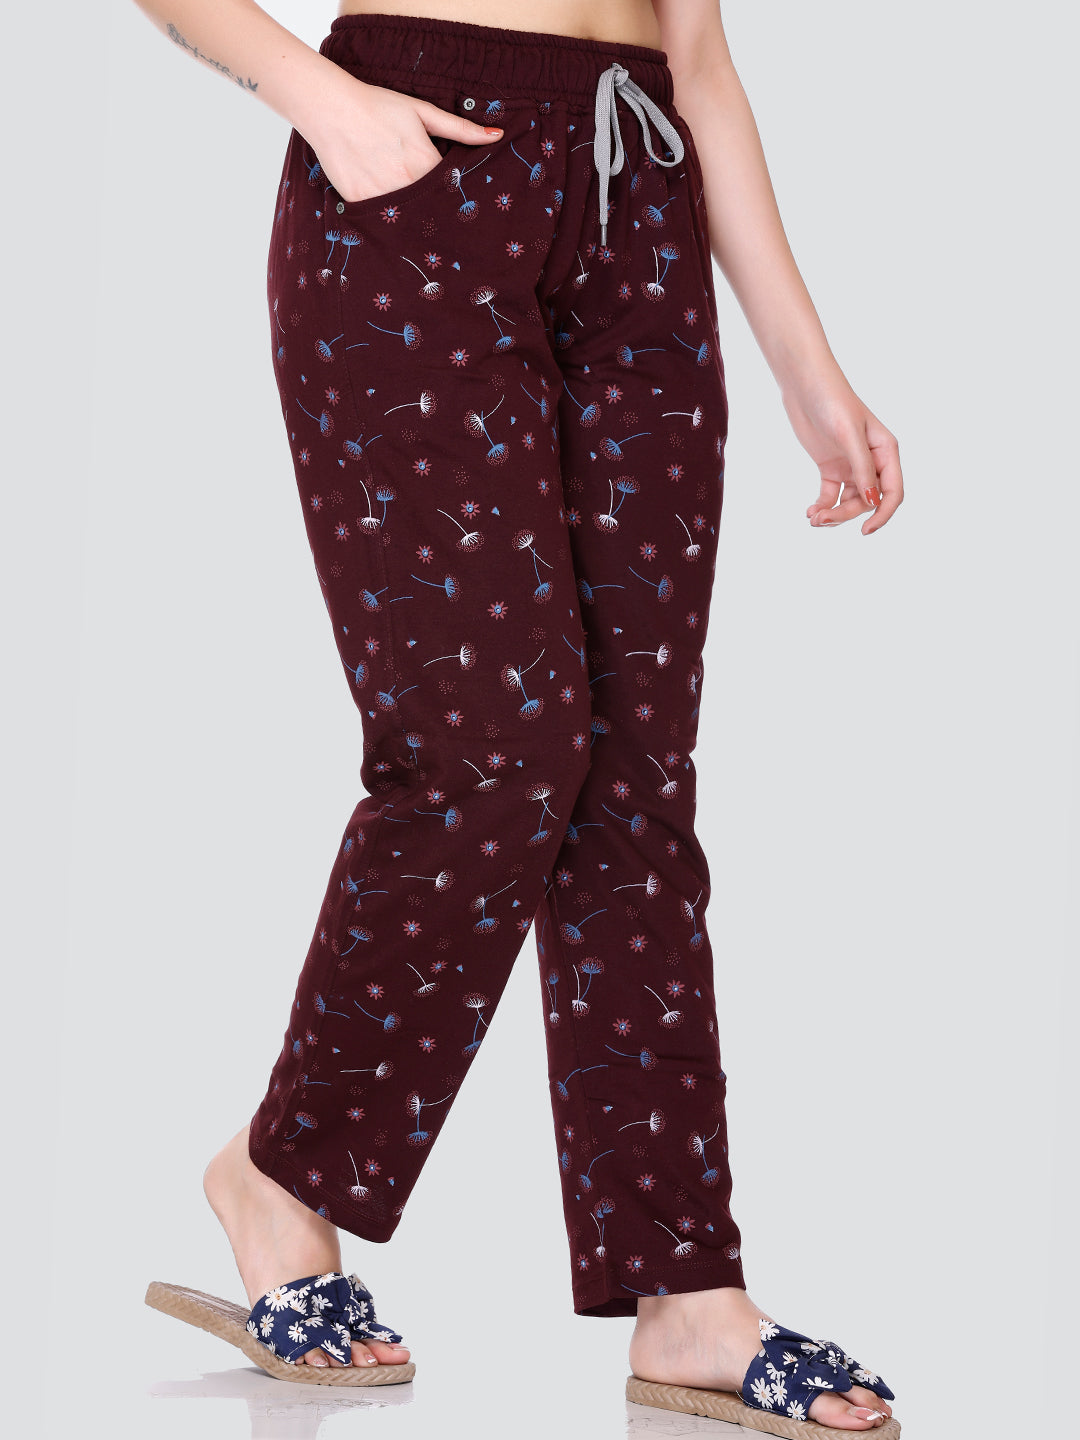 Casual Womens Pyjamas And Lounge Pants - Buy Casual Womens Pyjamas And Lounge  Pants Online at Best Prices In India | Flipkart.com